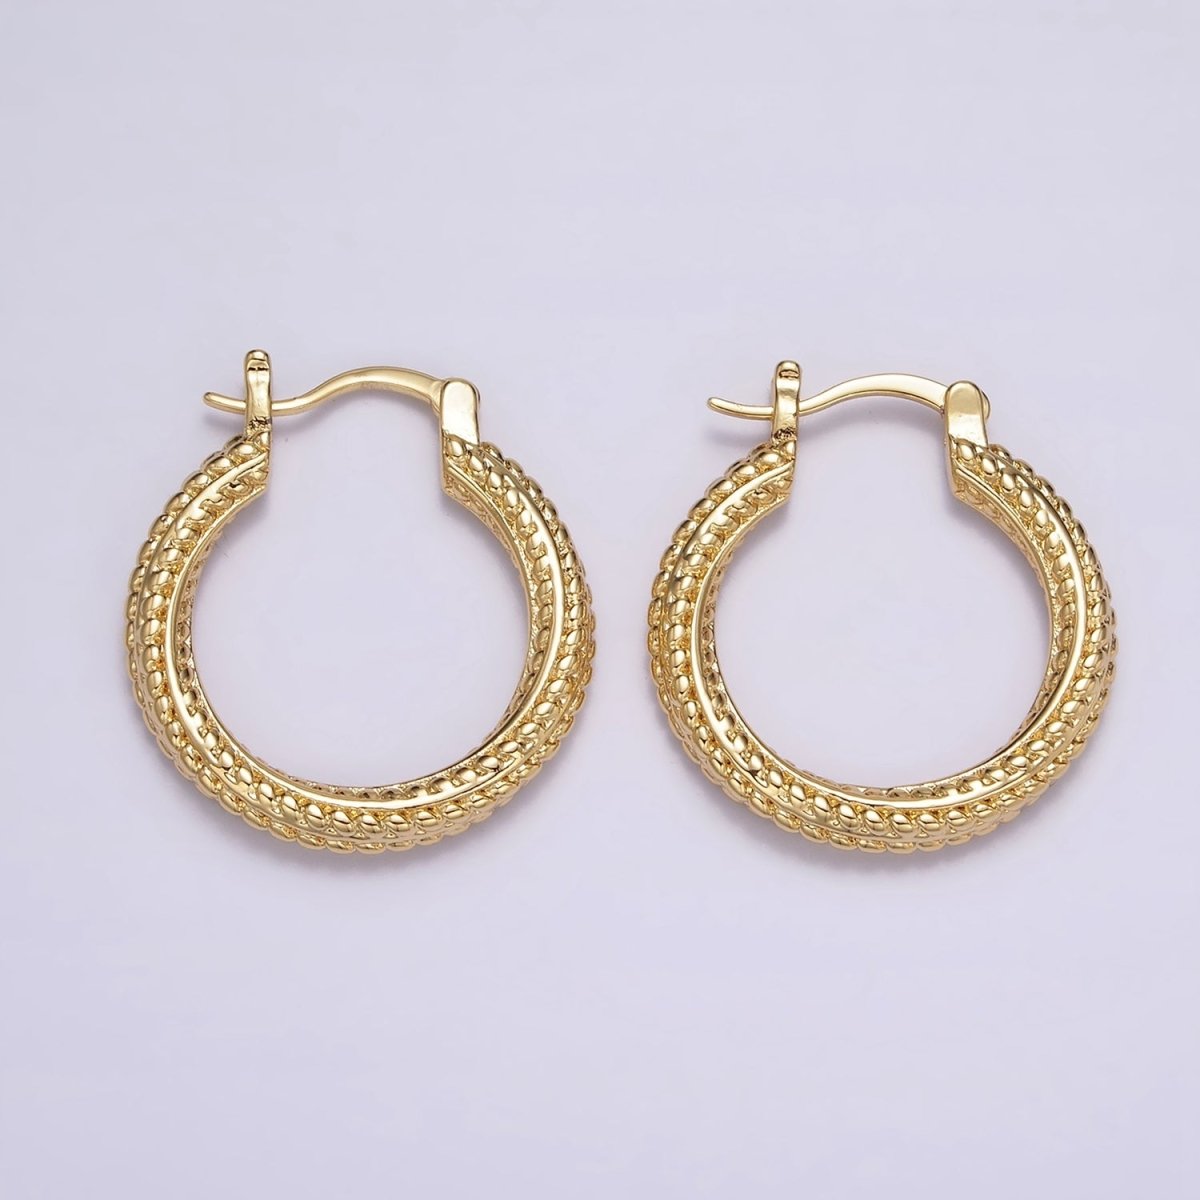 16K Gold Filled 25mm Dotted Braided Twist French Lock Latch Hoop Earrings | AE-601 - DLUXCA